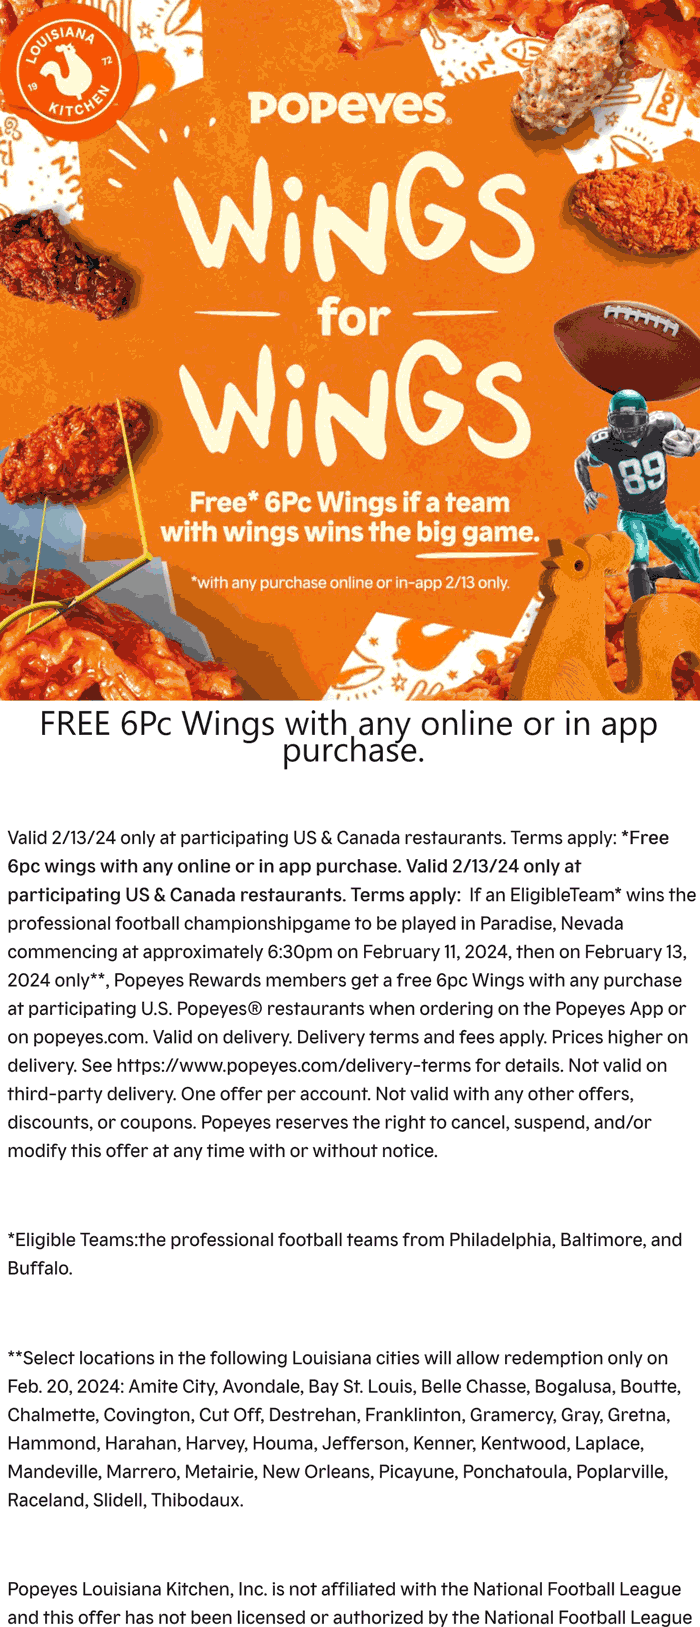 Free 6pc chicken wings the 13th if Philly, Baltimore or Buffalo win big game the 11th at Popeyes #popeyes